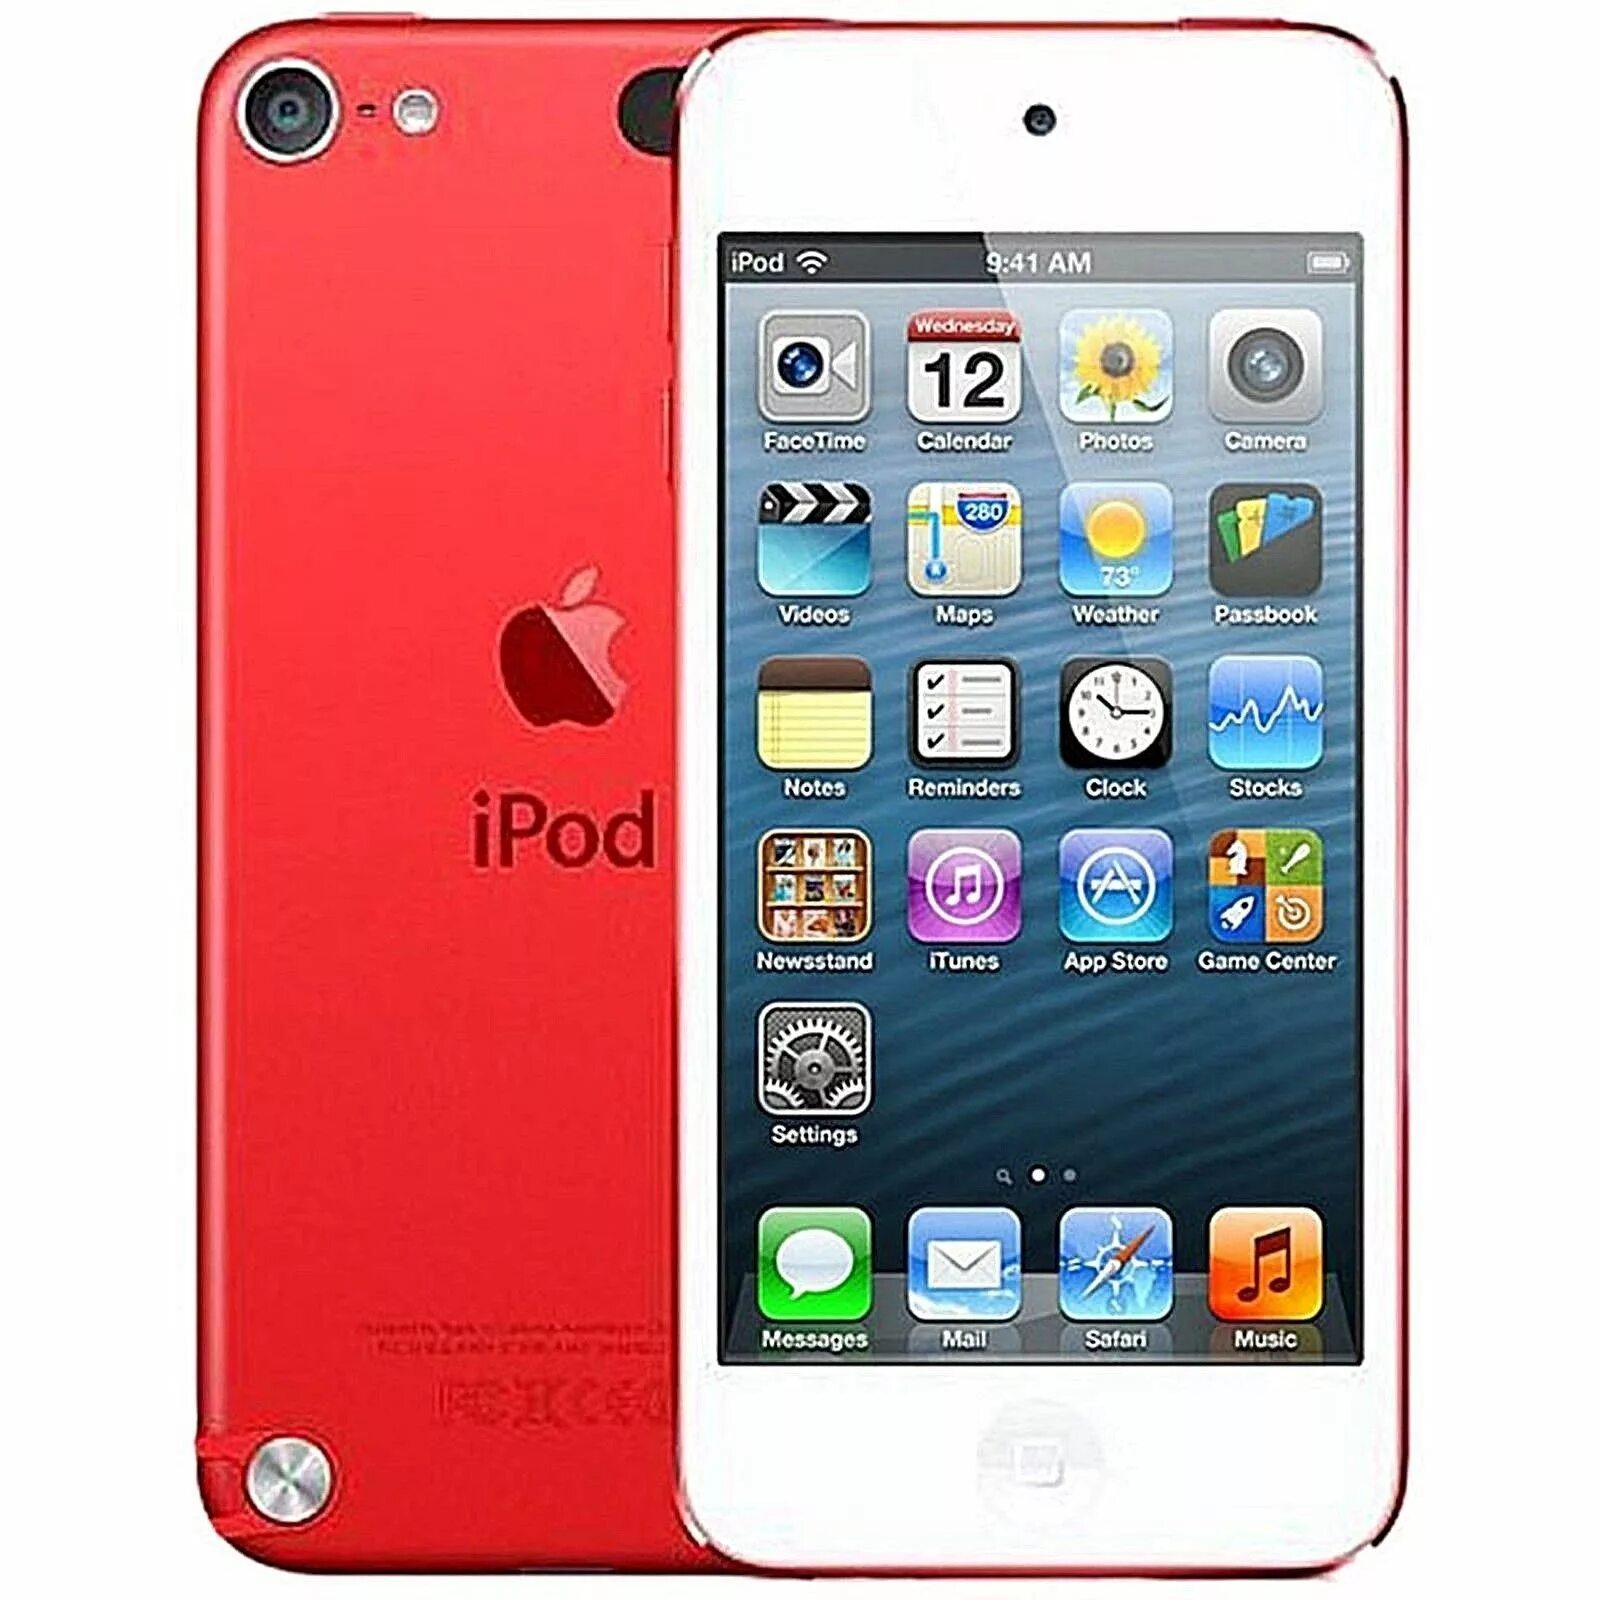 Айпод тач 5 16 ГБ. IPOD Touch 5 32gb. IPOD Touch 32 GB Blue. IPOD Touch 5 16 GB 32 GB.